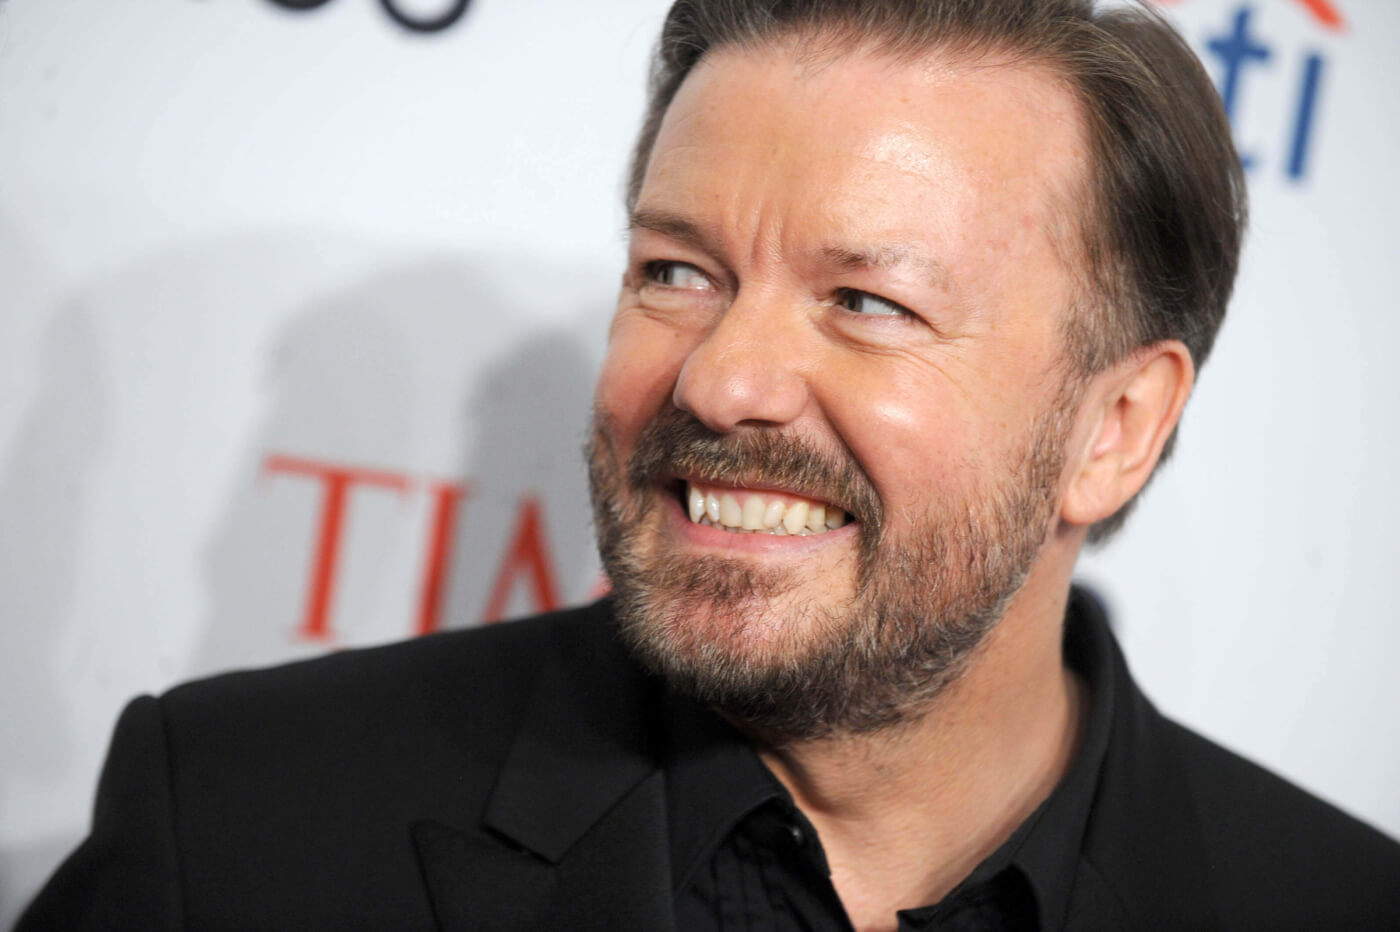 Ricky Gervais Is PETA's Person of the Year | PETA